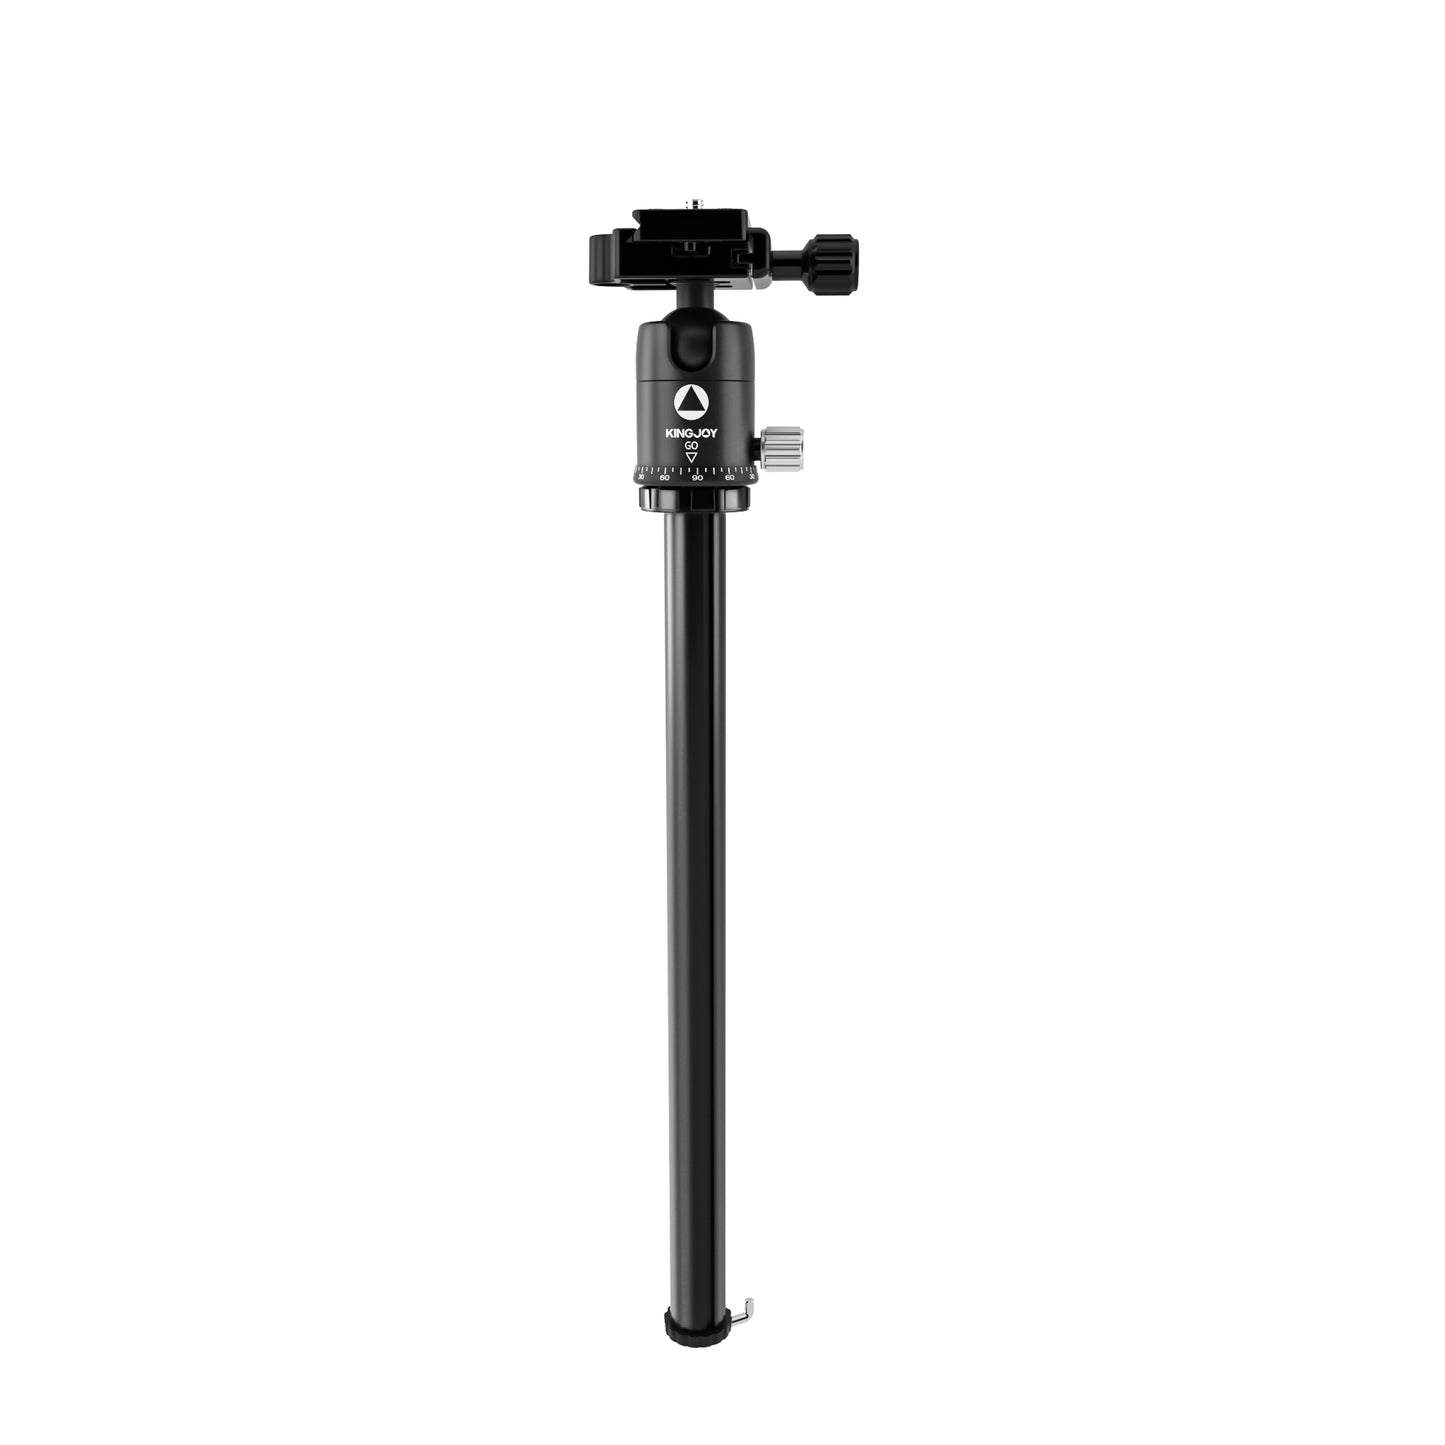 Kingjoy G55 aluminum compact foldable lightweight twist lock photo tripod with G0 ball head-4 section, 61in. 3lbs